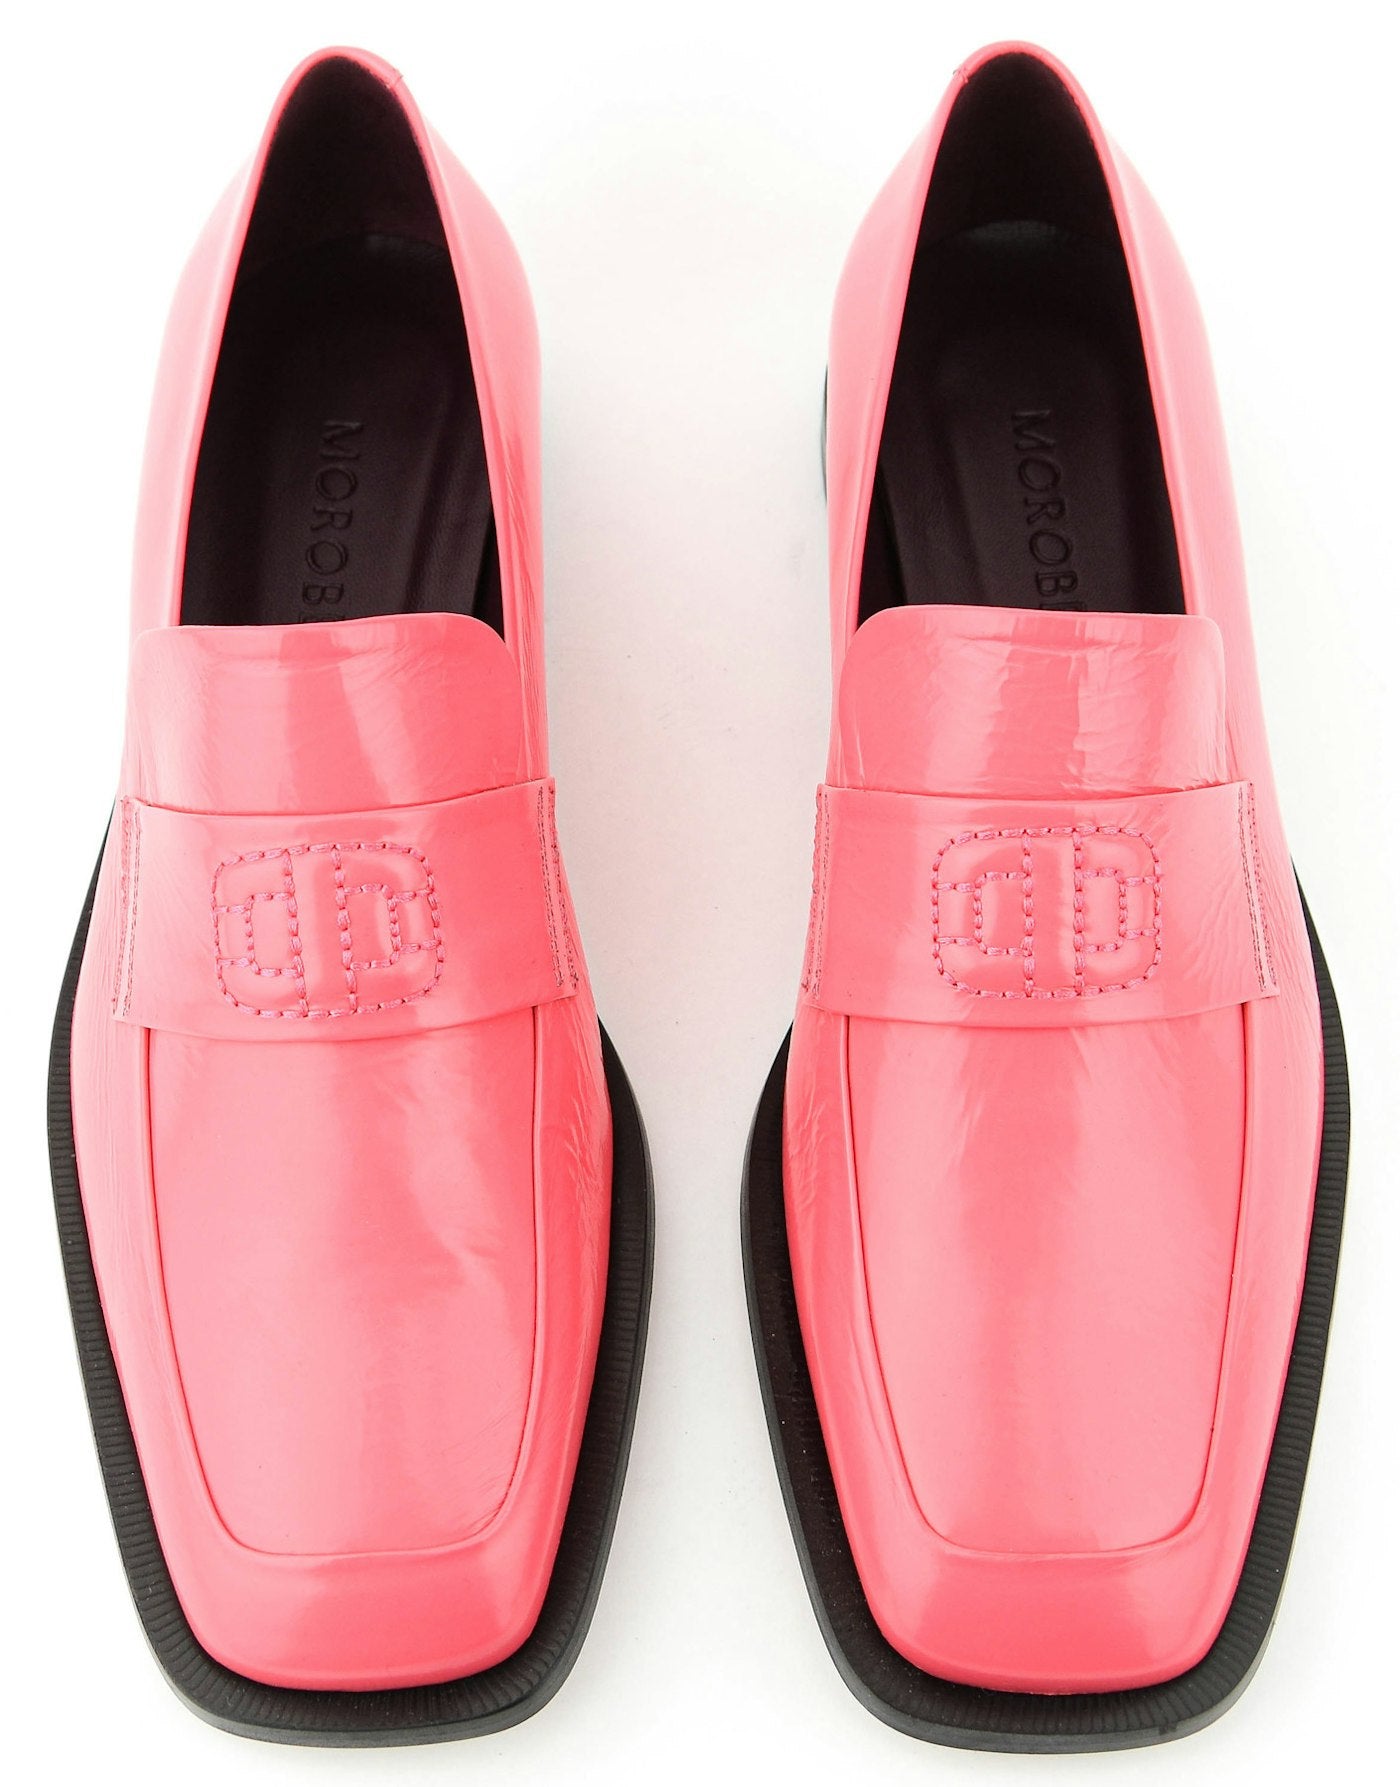 MOROBE MULLY 03 LOAFER BUBBL;EGUM